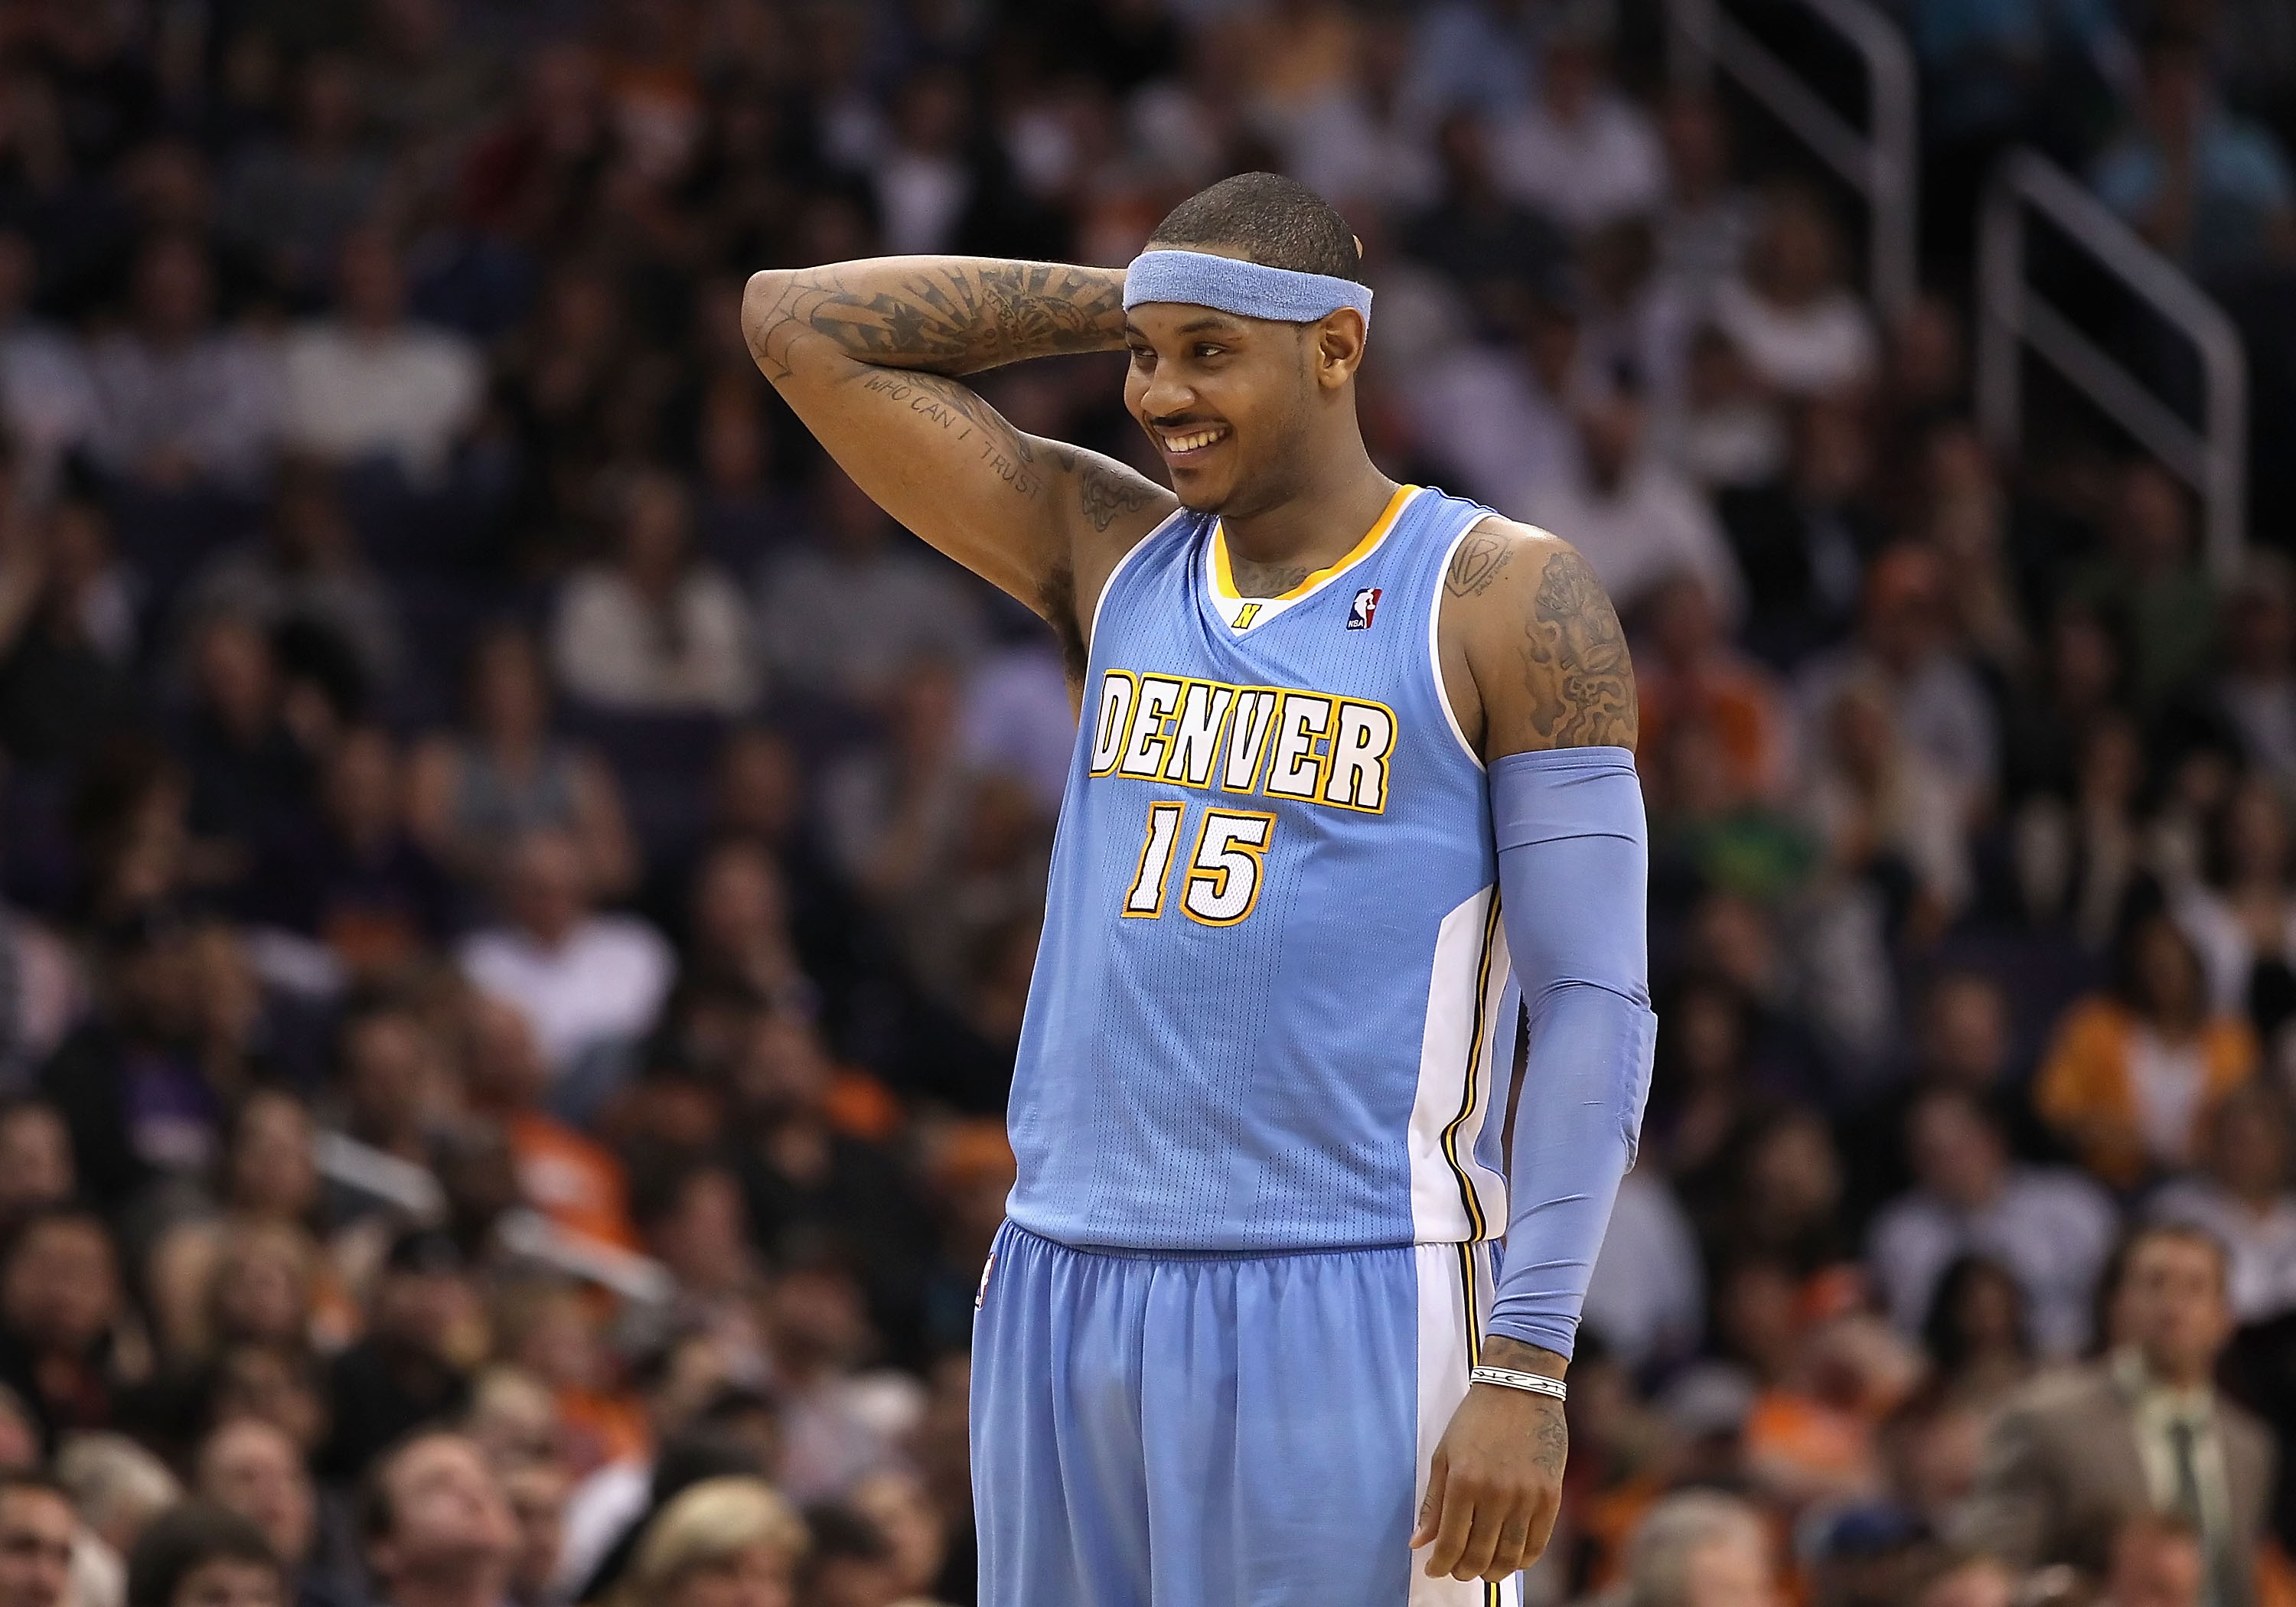 Brooklyn Nets: Carmelo Anthony not a risk worth taking